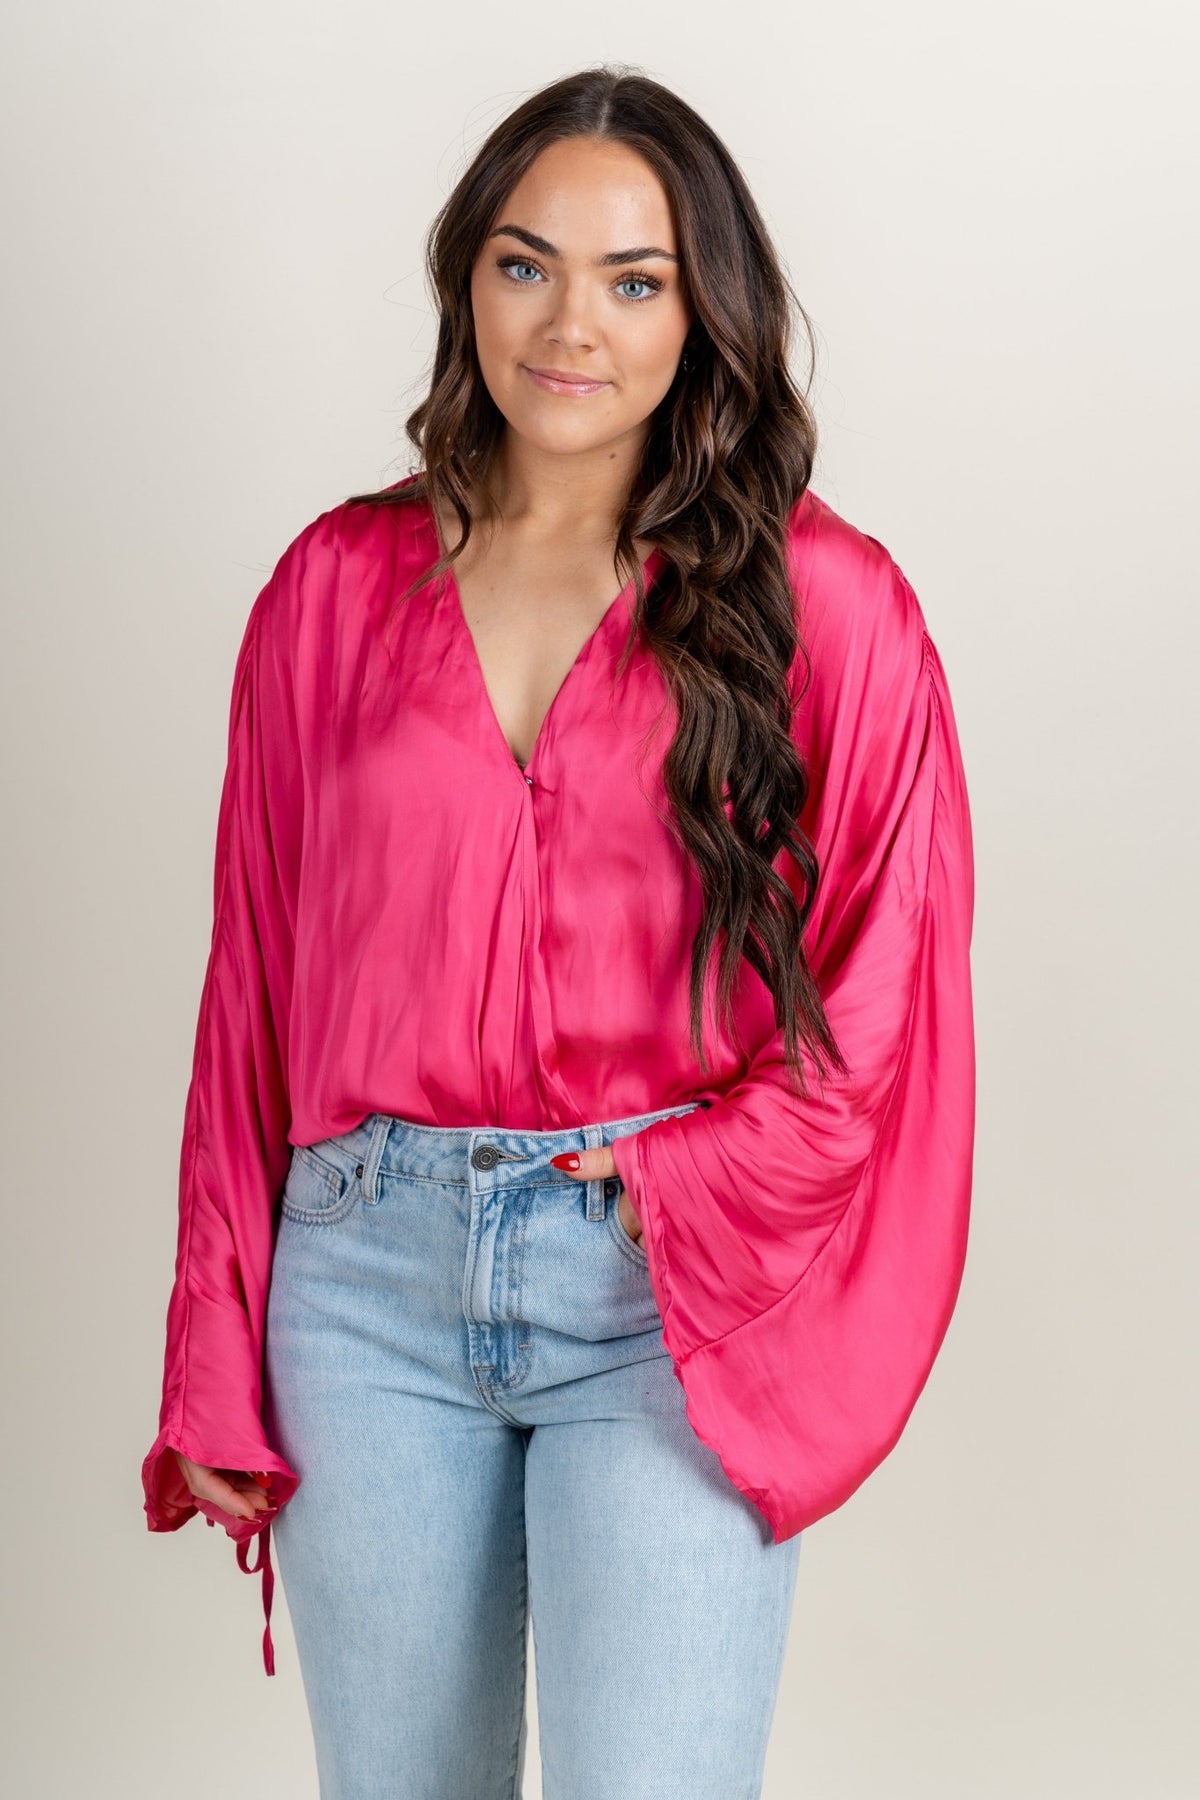 Ruched shirred bodysuit fuchsia - Trendy T-Shirts for Valentine's Day at Lush Fashion Lounge Boutique in Oklahoma City